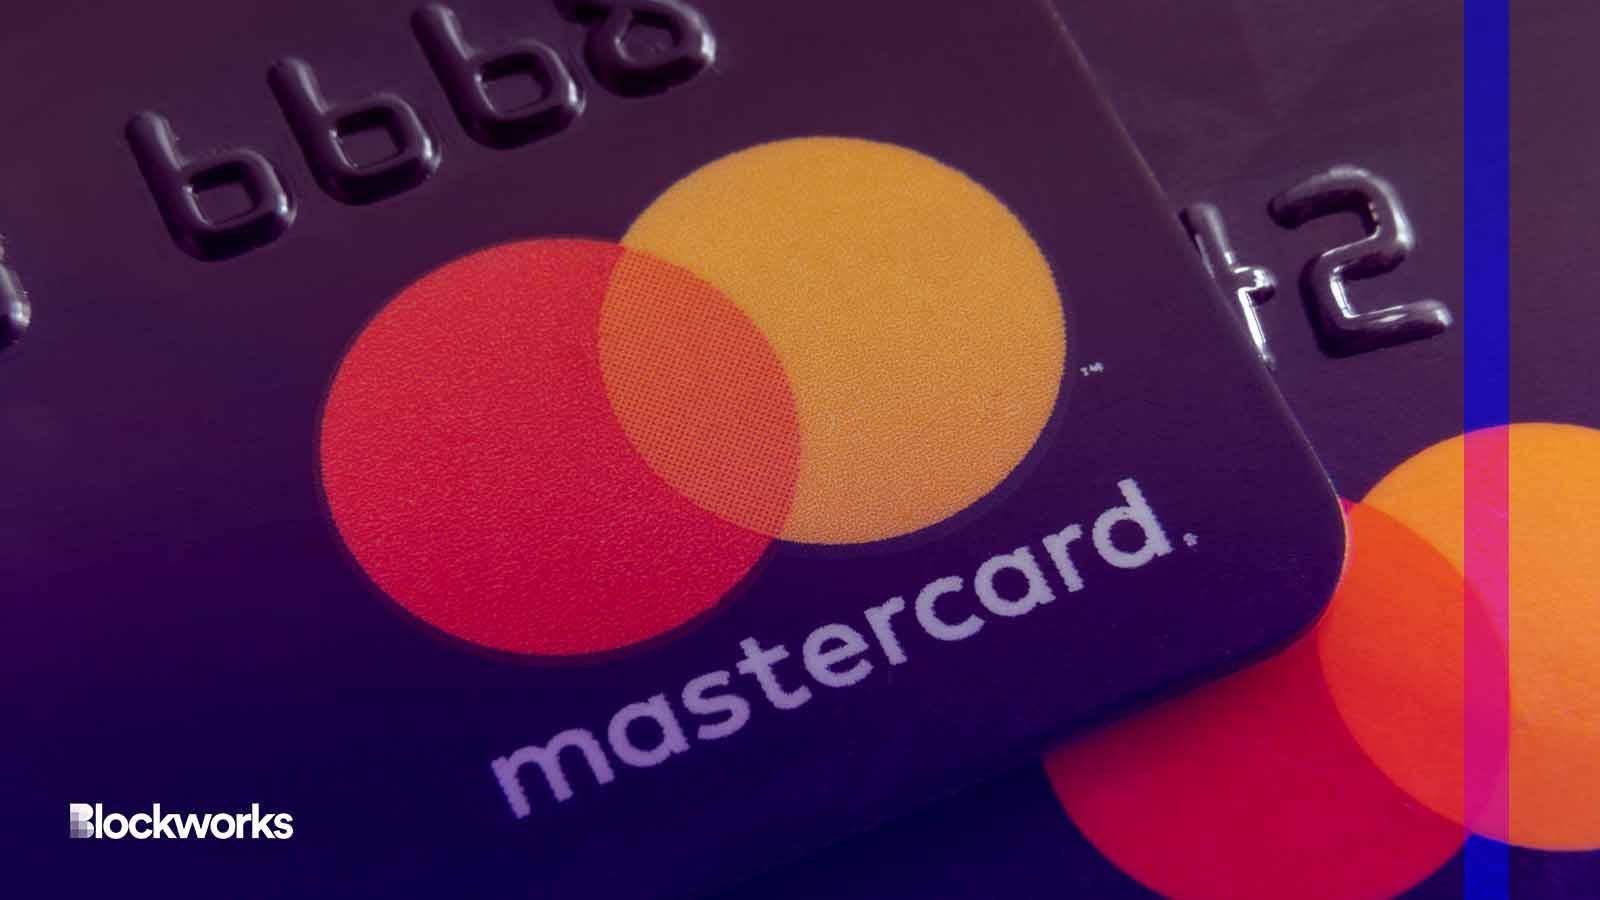 Mastercard doubles down on Crypto, Blockchain efforts with new offer